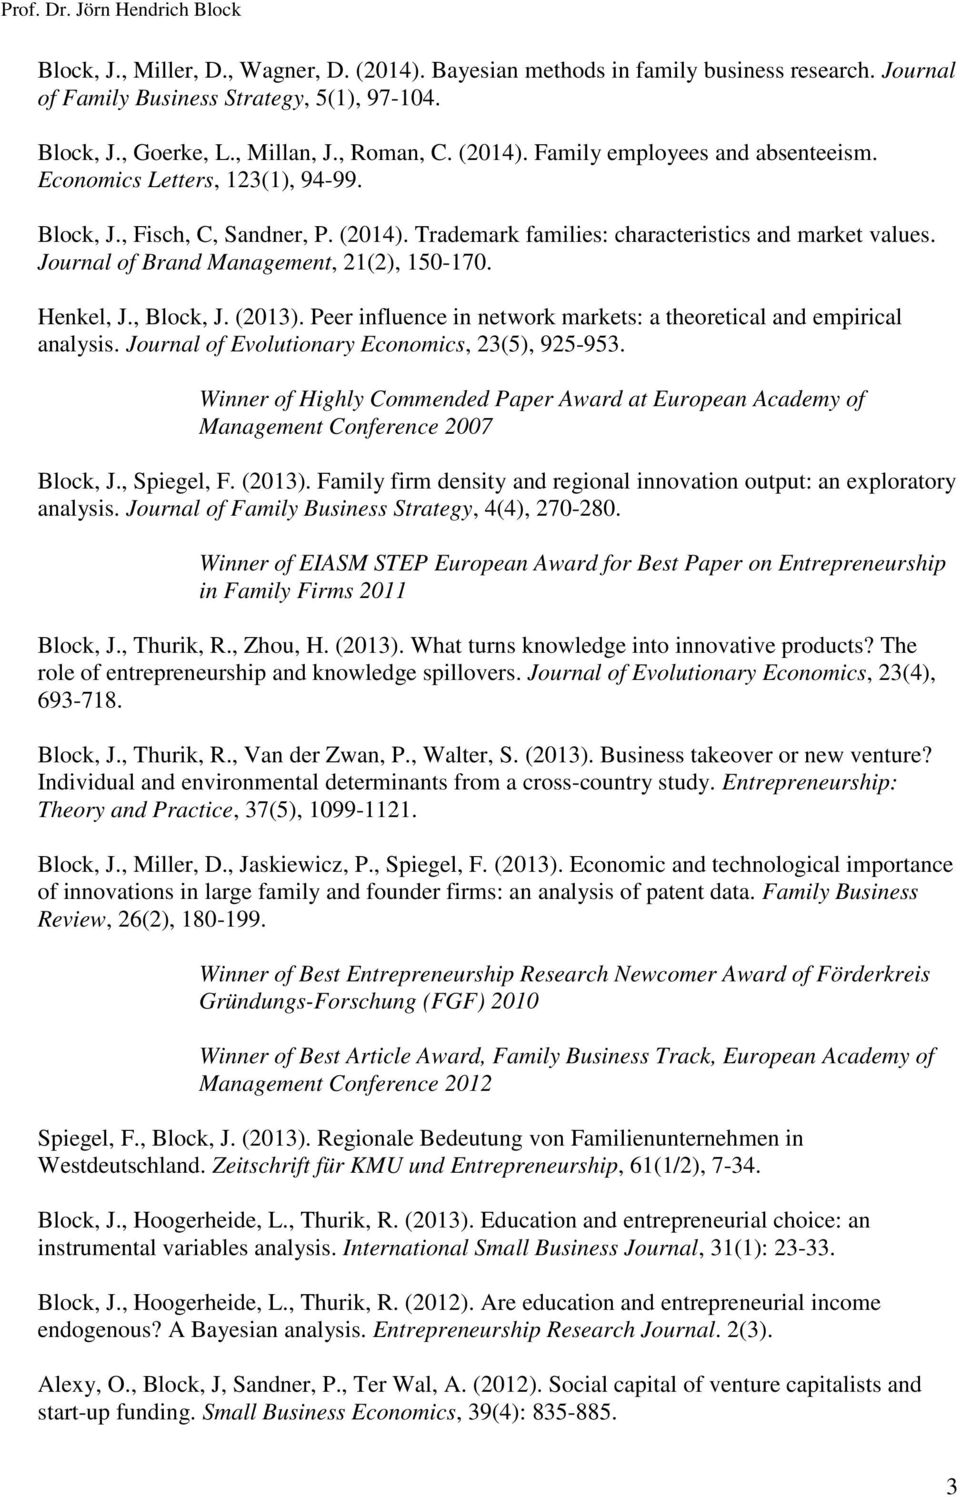 (2013). Peer influence in network markets: a theoretical and empirical analysis. Journal of Evolutionary Economics, 23(5), 925-953.